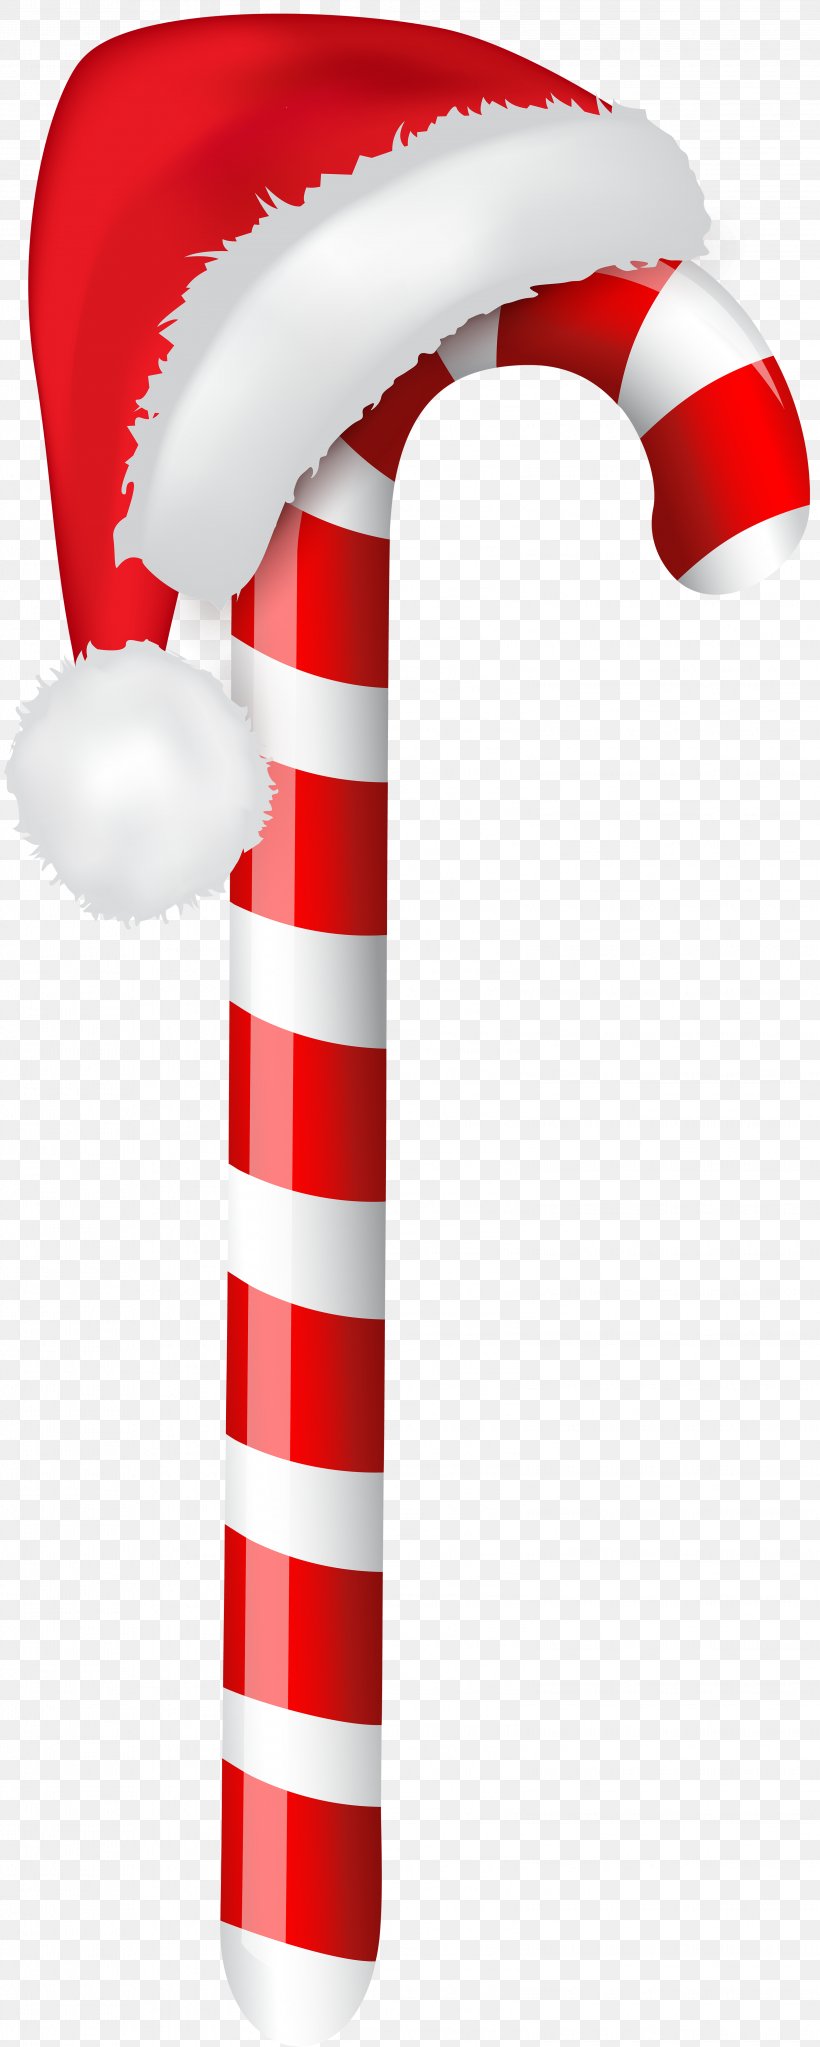 Candy Cane Santa Claus Christmas Clip Art, PNG, 3204x8000px, Candy Cane, Candy, Christmas, Christmas Tree, Hat Download Free